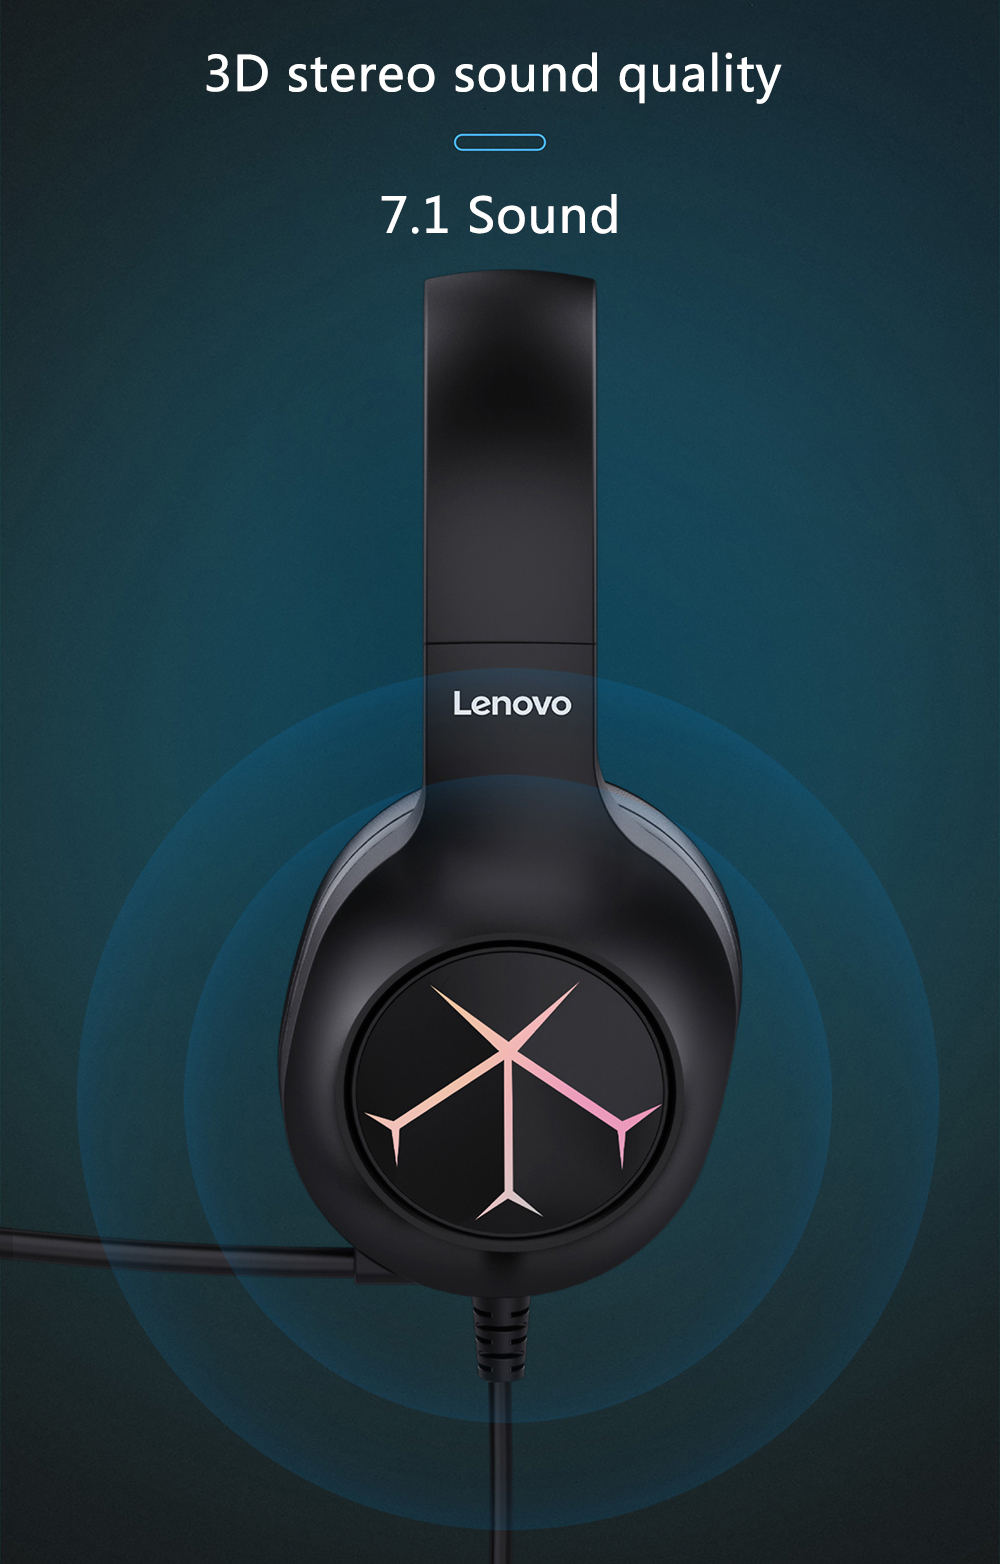 Lenovo-G60-Wired-Gaming-Headset-71-Stereo-Blue-Light-Over-Ear-Gaming-Headphone-with-Mic-Noise-Cancel-1900882-7